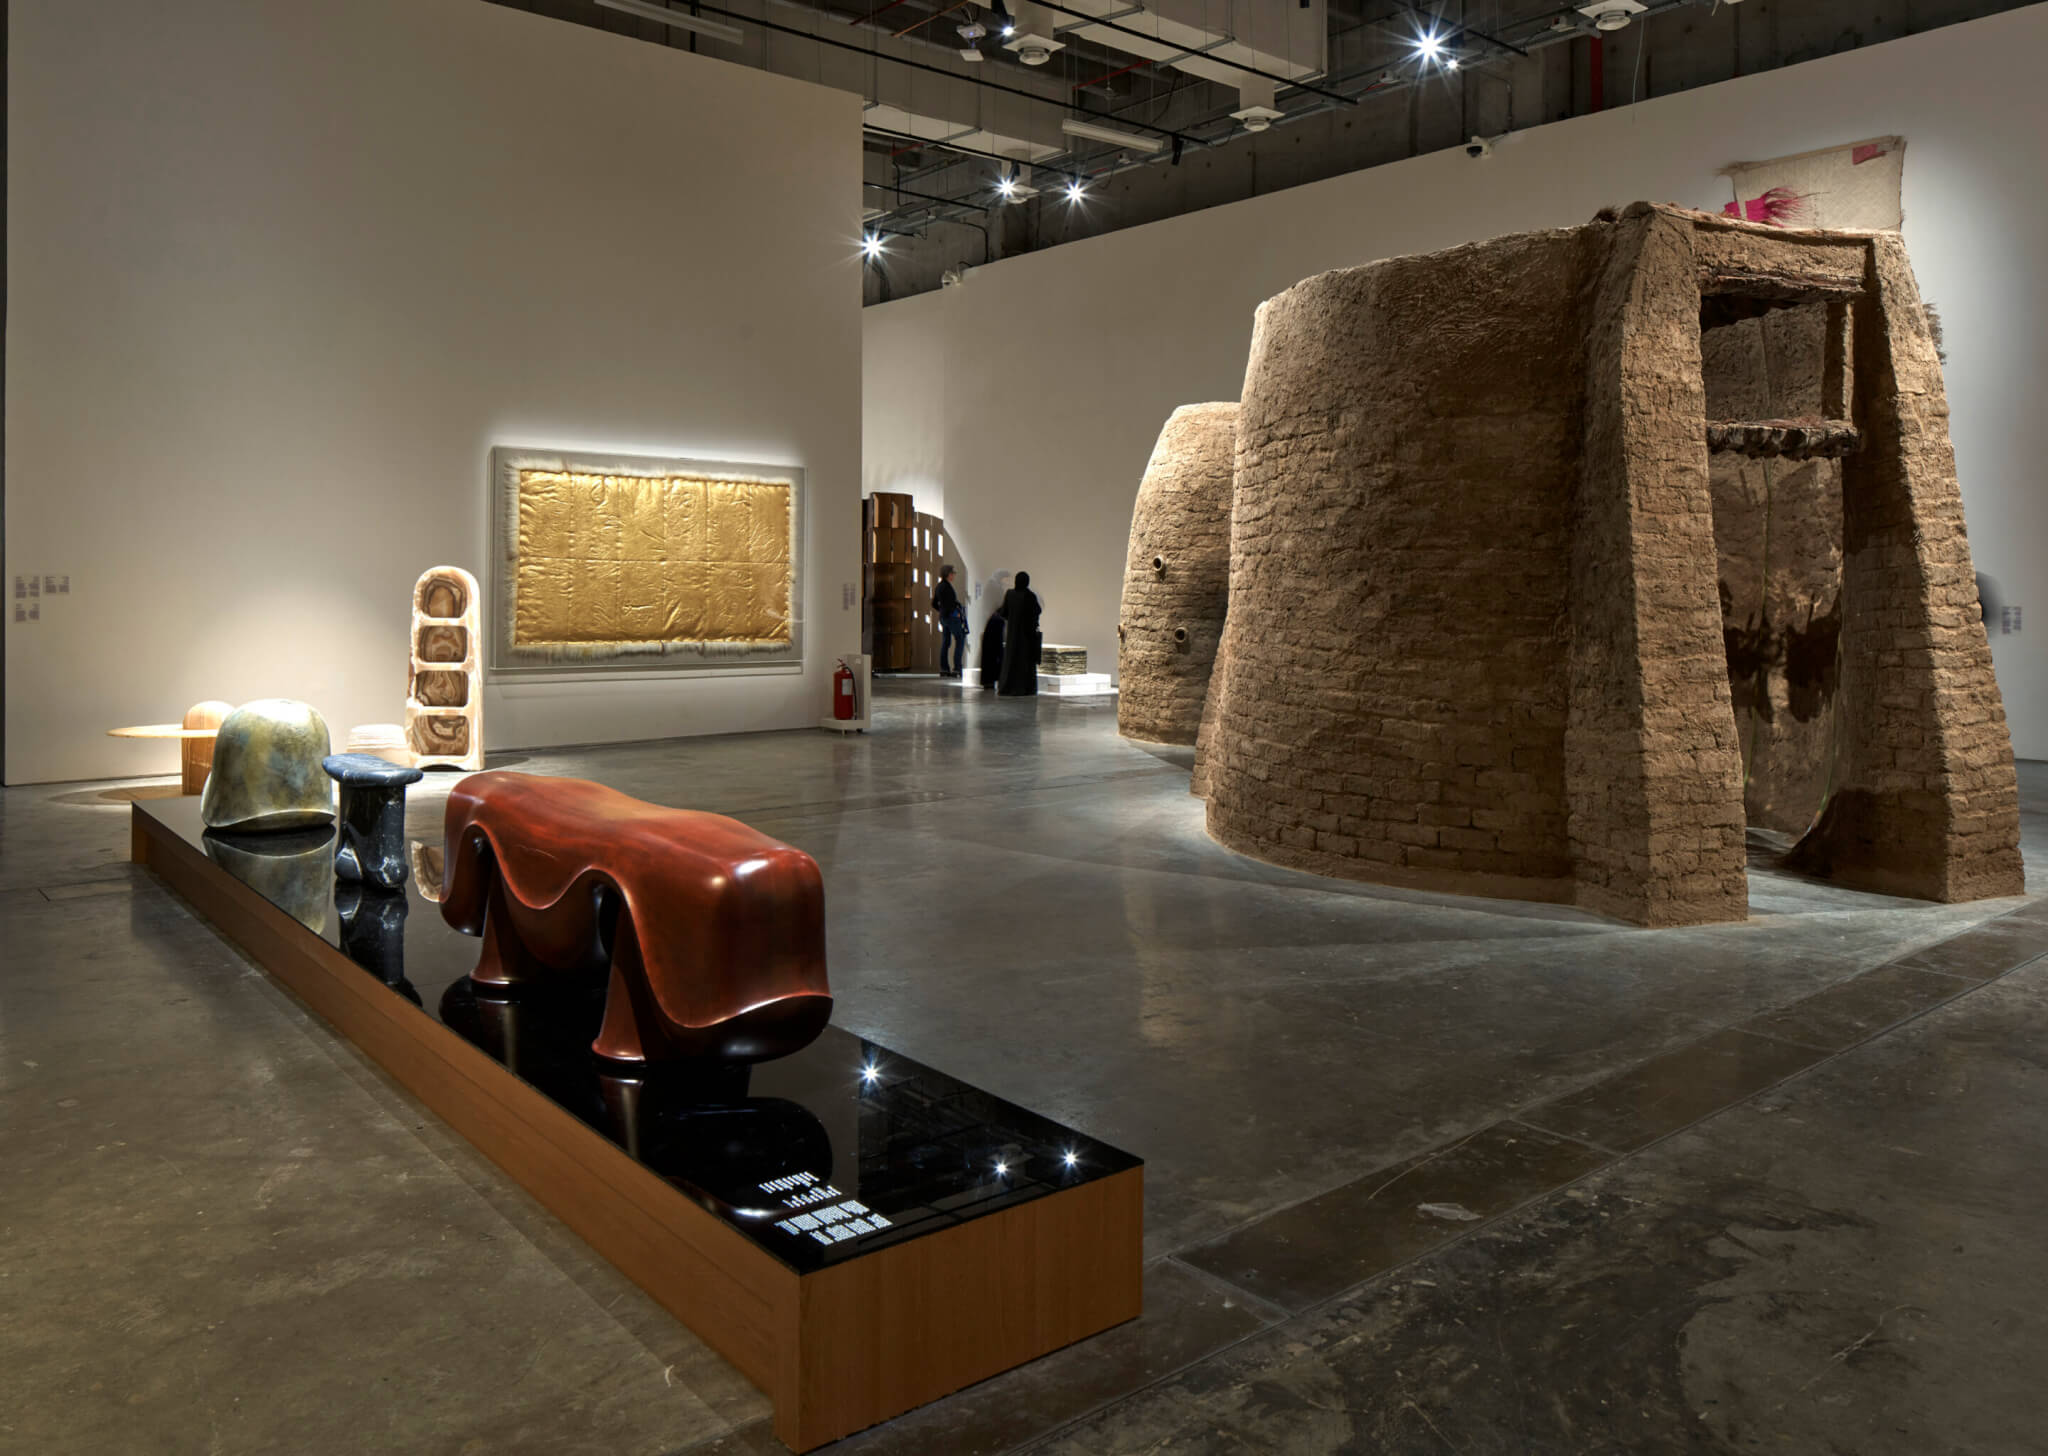 installation view of Arab Design Now